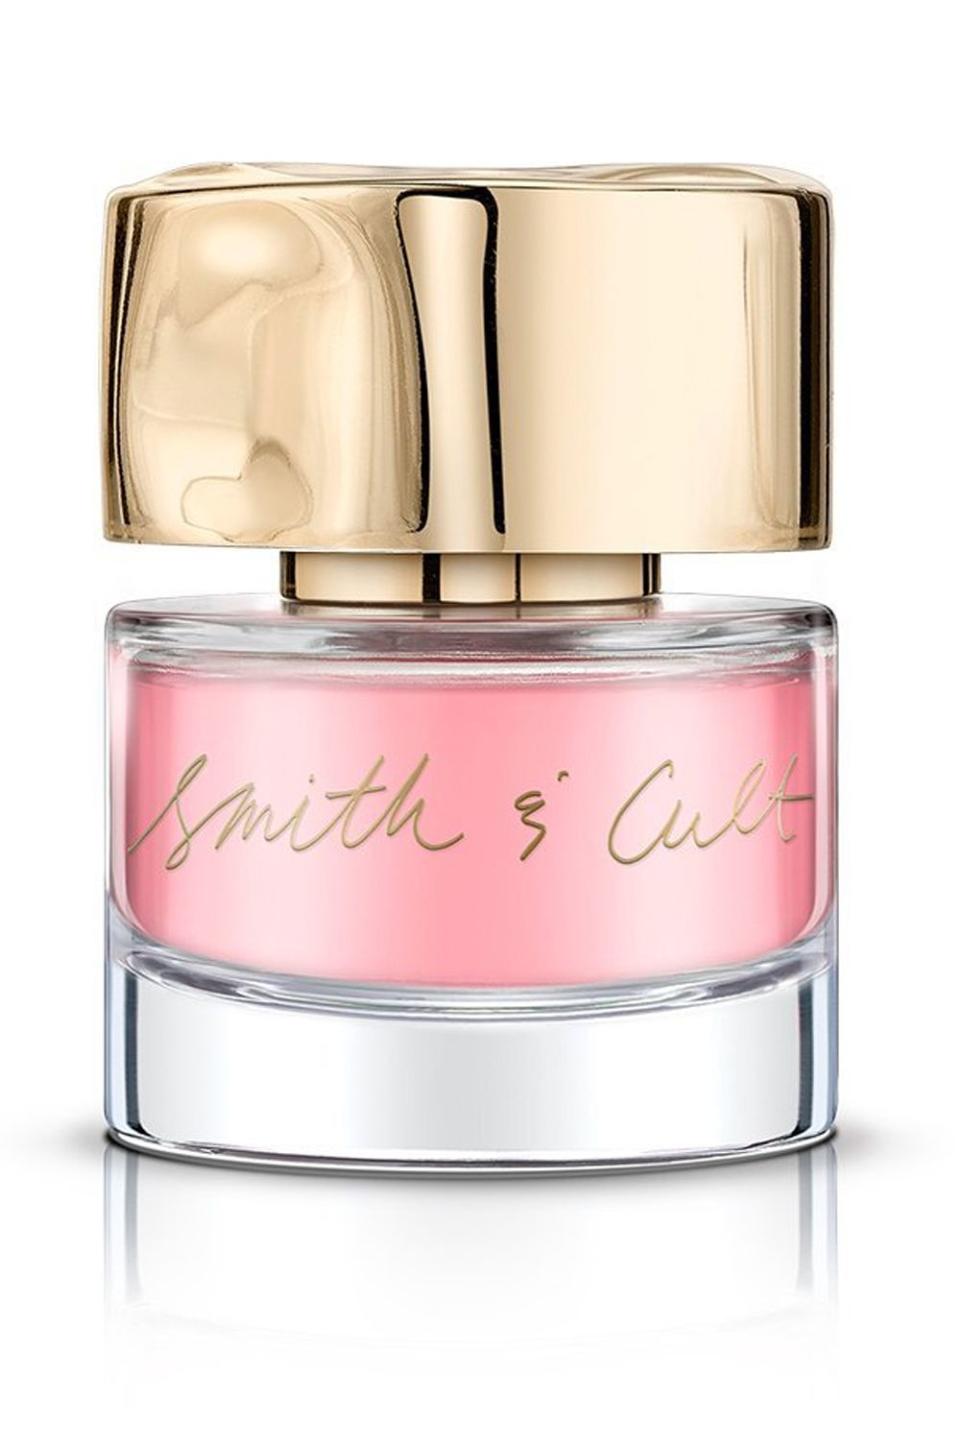 2) Smith & Cult Nail Lacquer in Basis of Everything